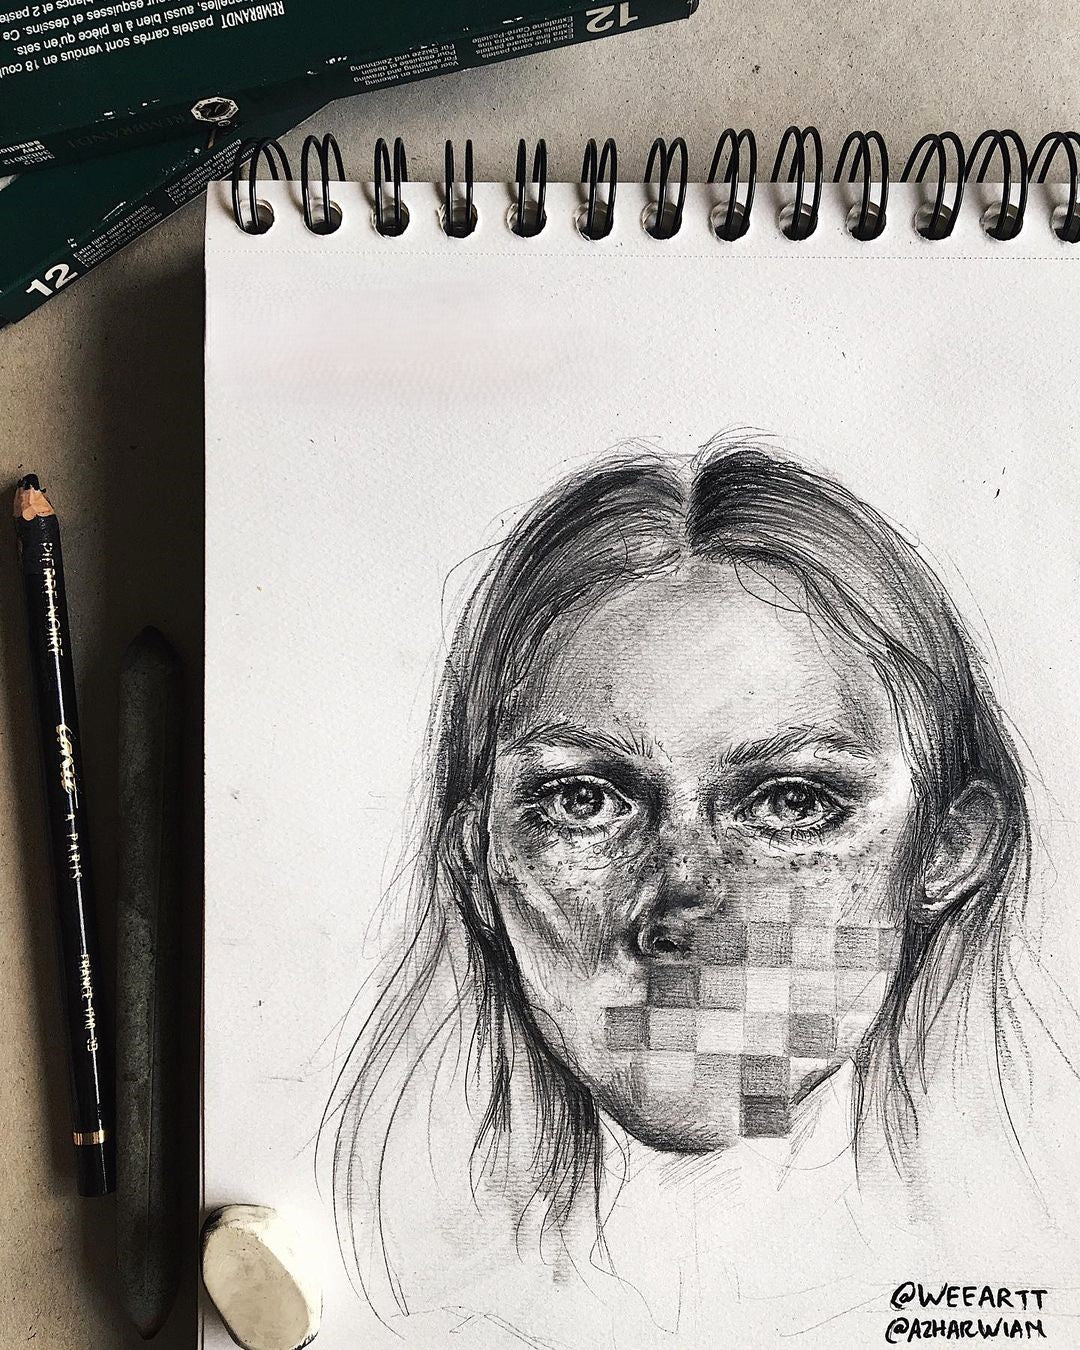 @azharwiam pencil sketch of a girl with the bottom right corner of her face pixelated